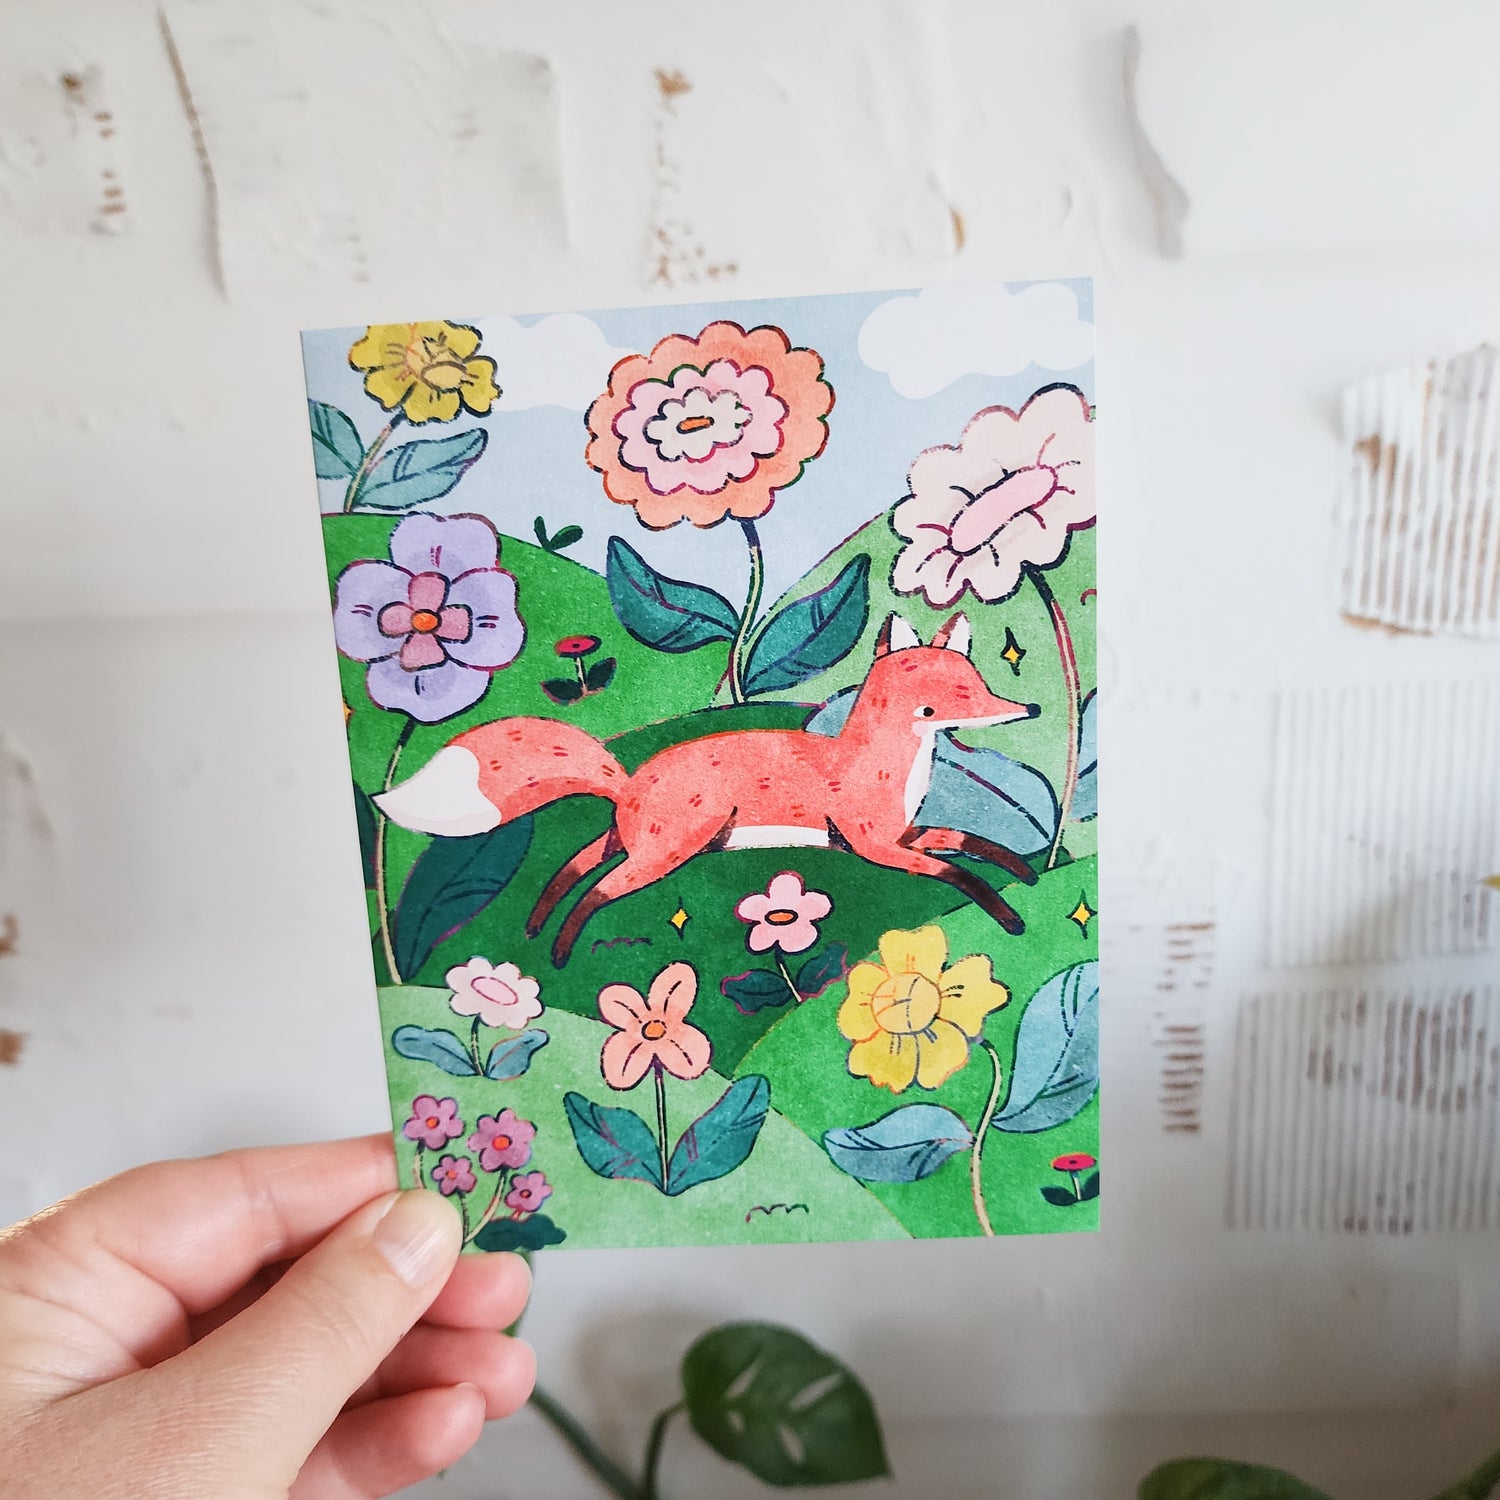 greeting card with a fox illustration held in a hand